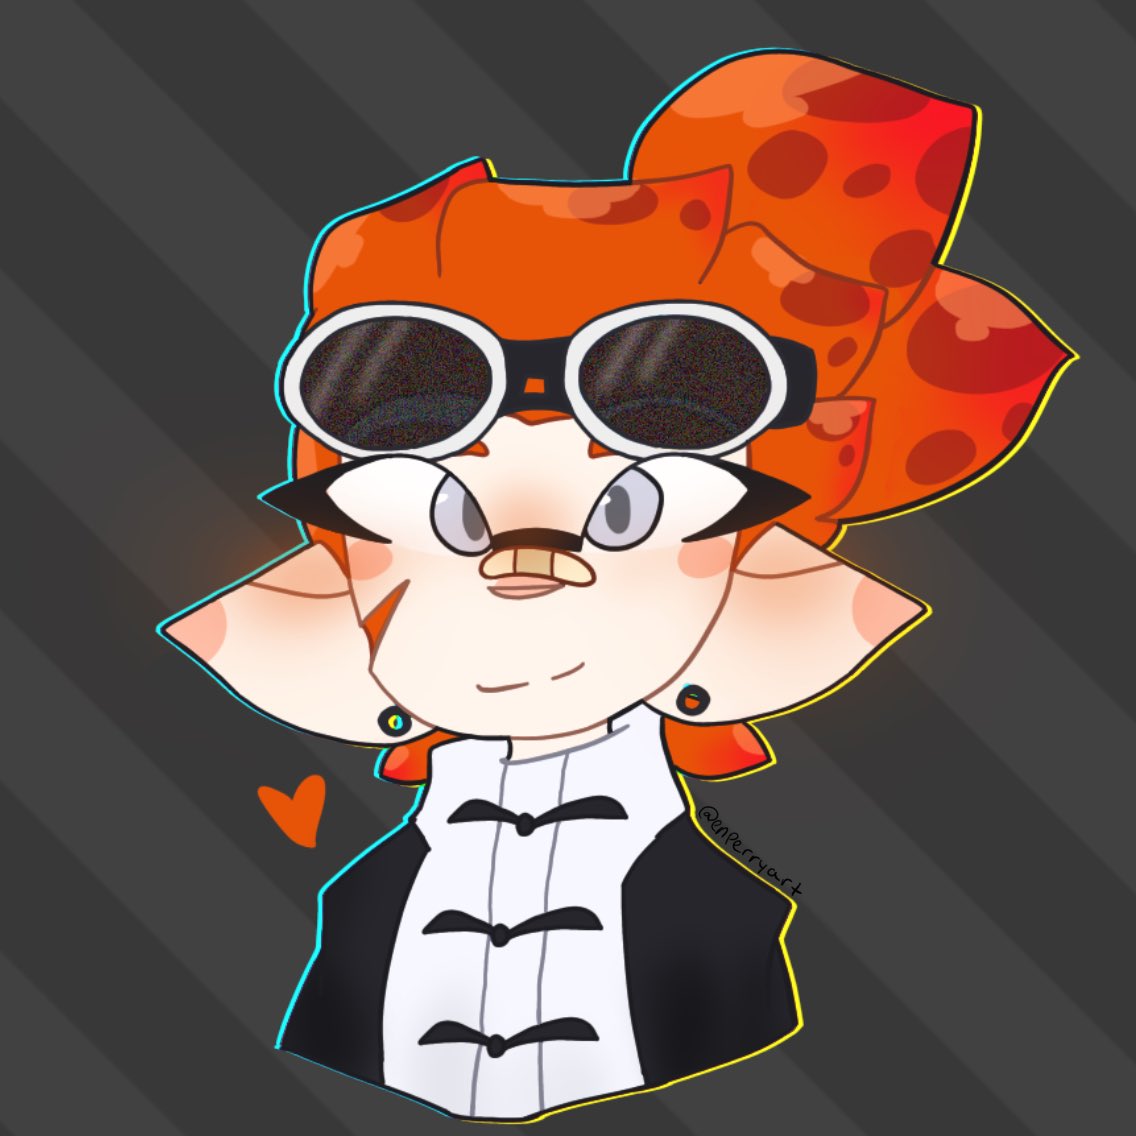 Hello, there! My online name is Miyu, but on here you can call me Enperry or Kitti!I draw Splatoon and coroika, sometimes post really random and weird stuff, and hope to make everyone’s time here worthwhile! ^^